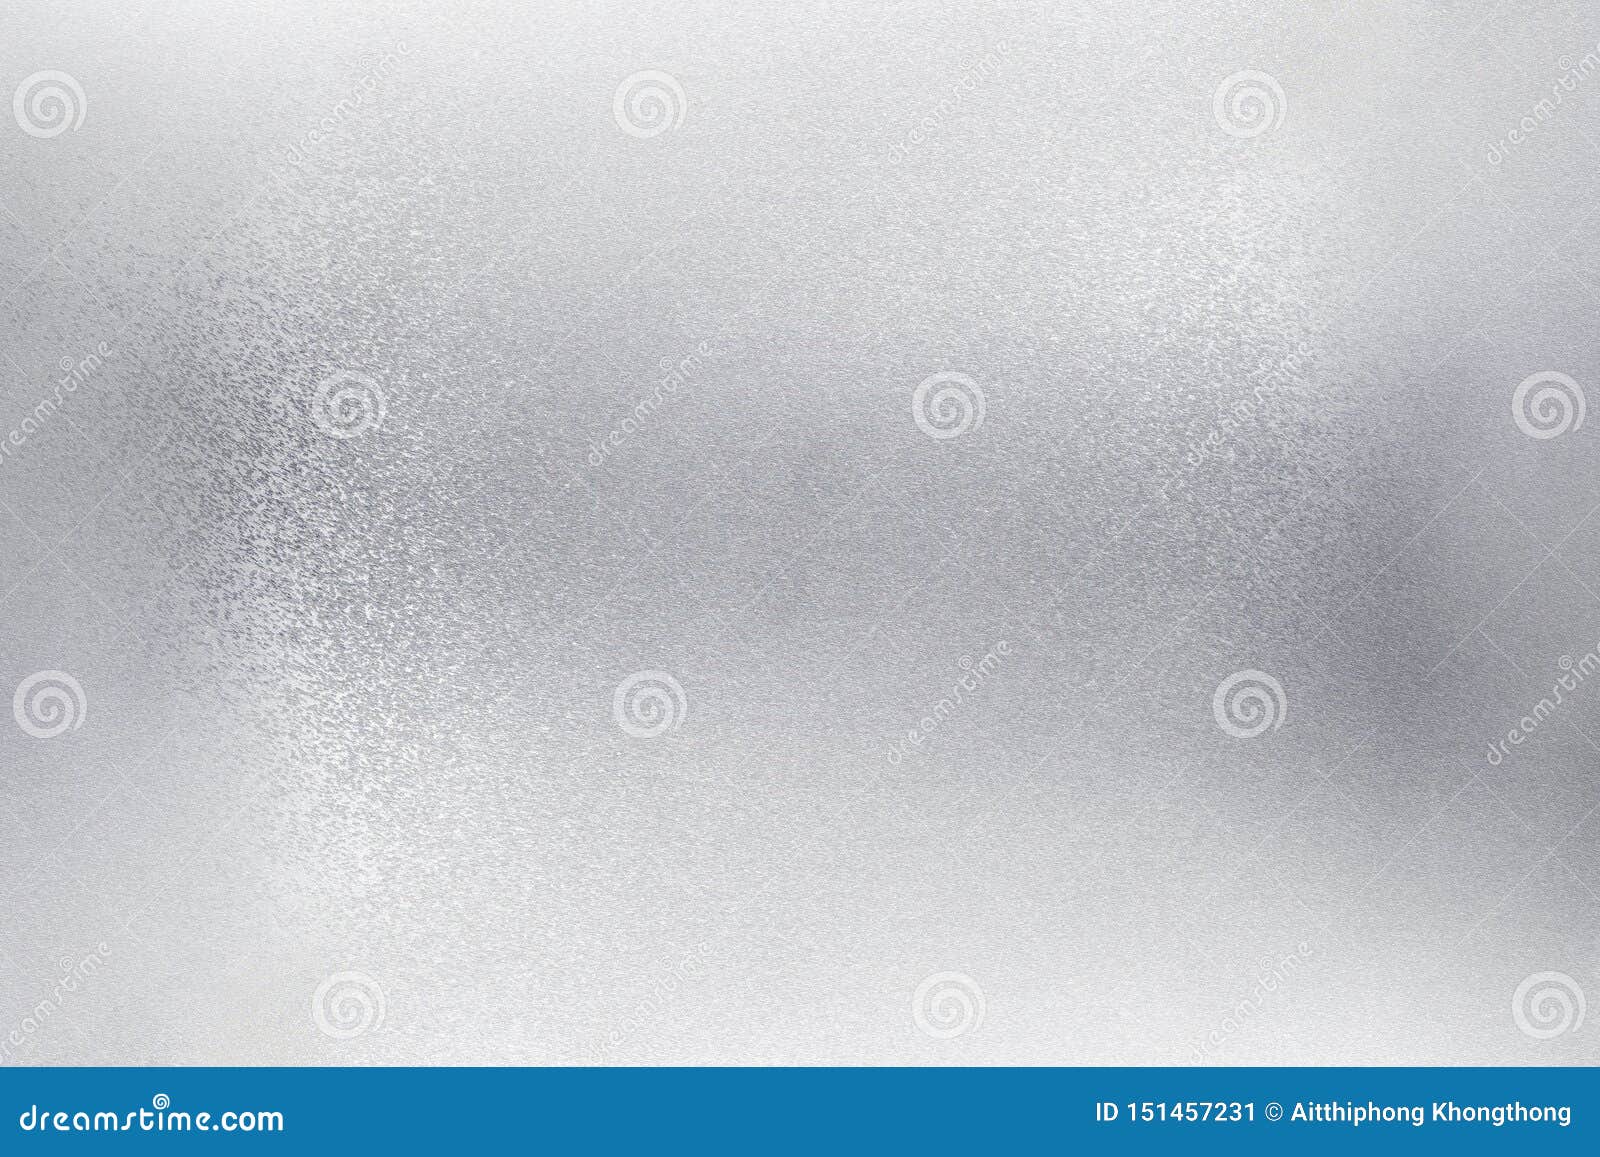 Glowing Brushed Silver Foil Metallic Wall, Abstract Texture Background ...